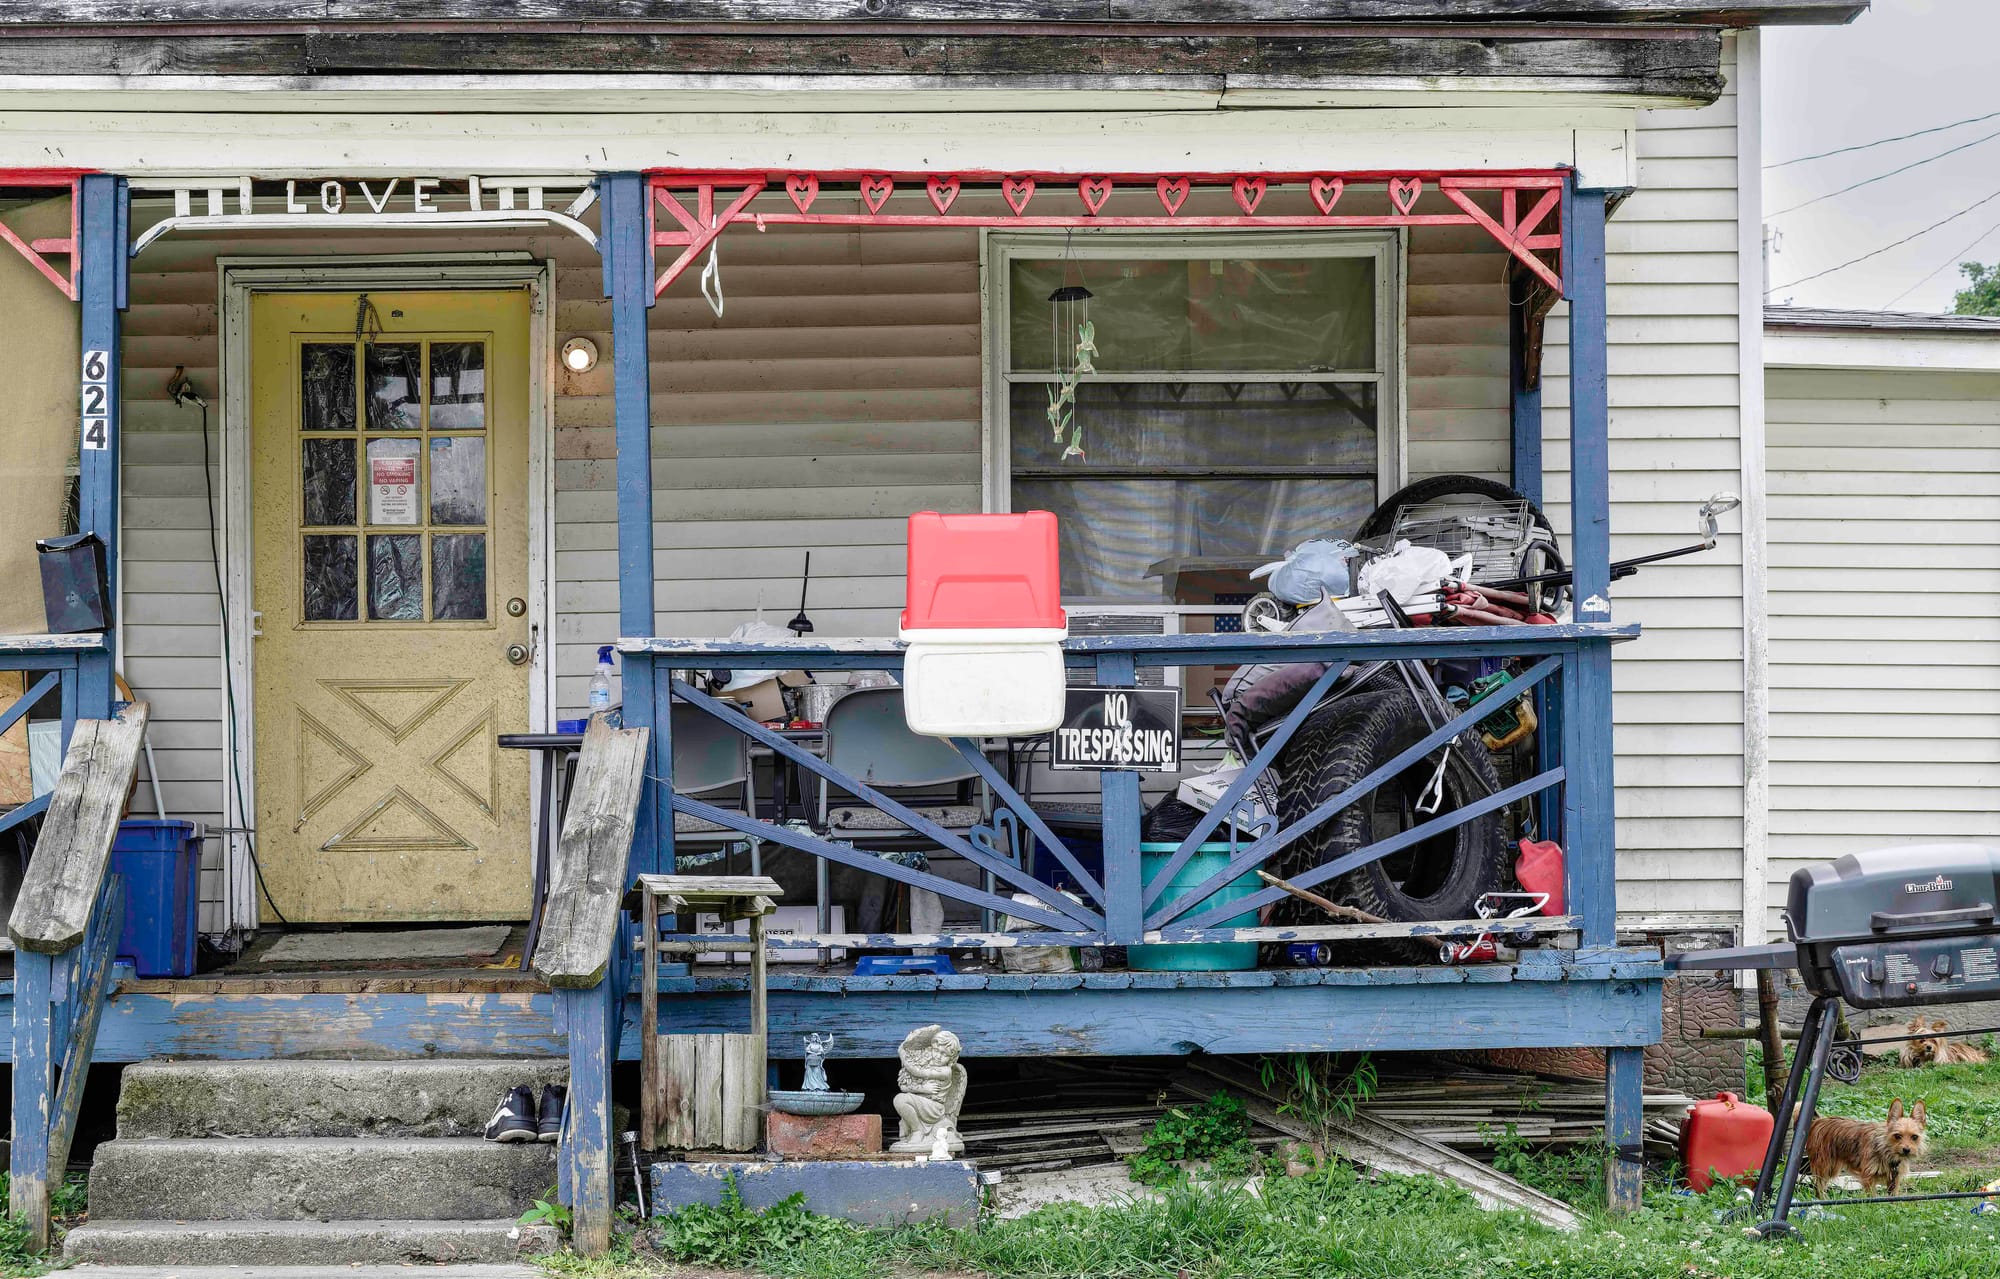 Clutter art, or, can you believe how much crap is on that porch?